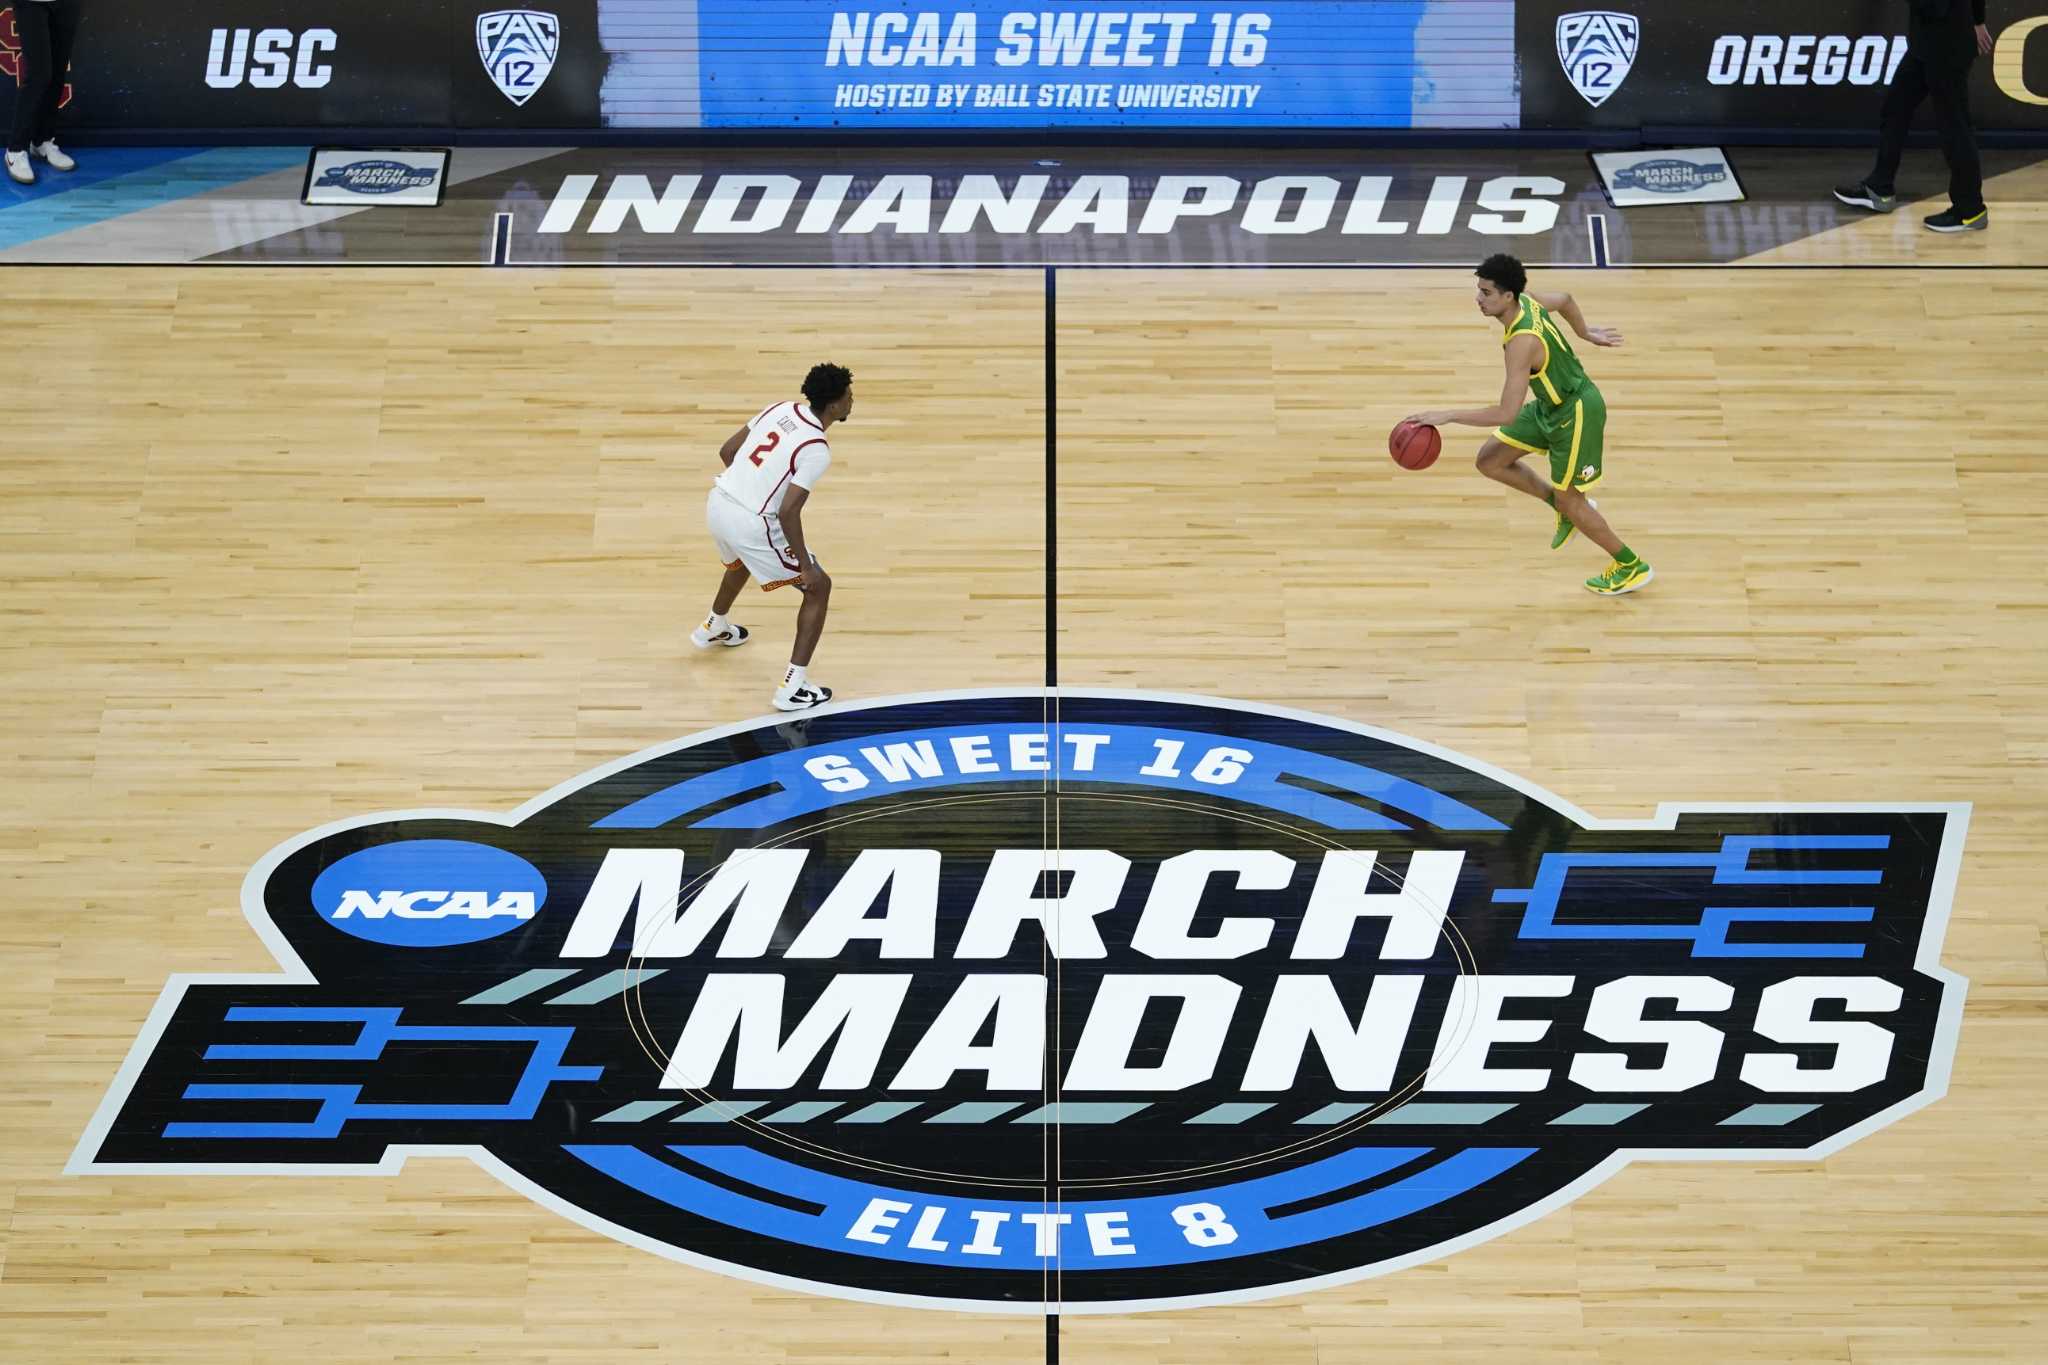 How to watch March Madness Selection Sunday on TV, stream online